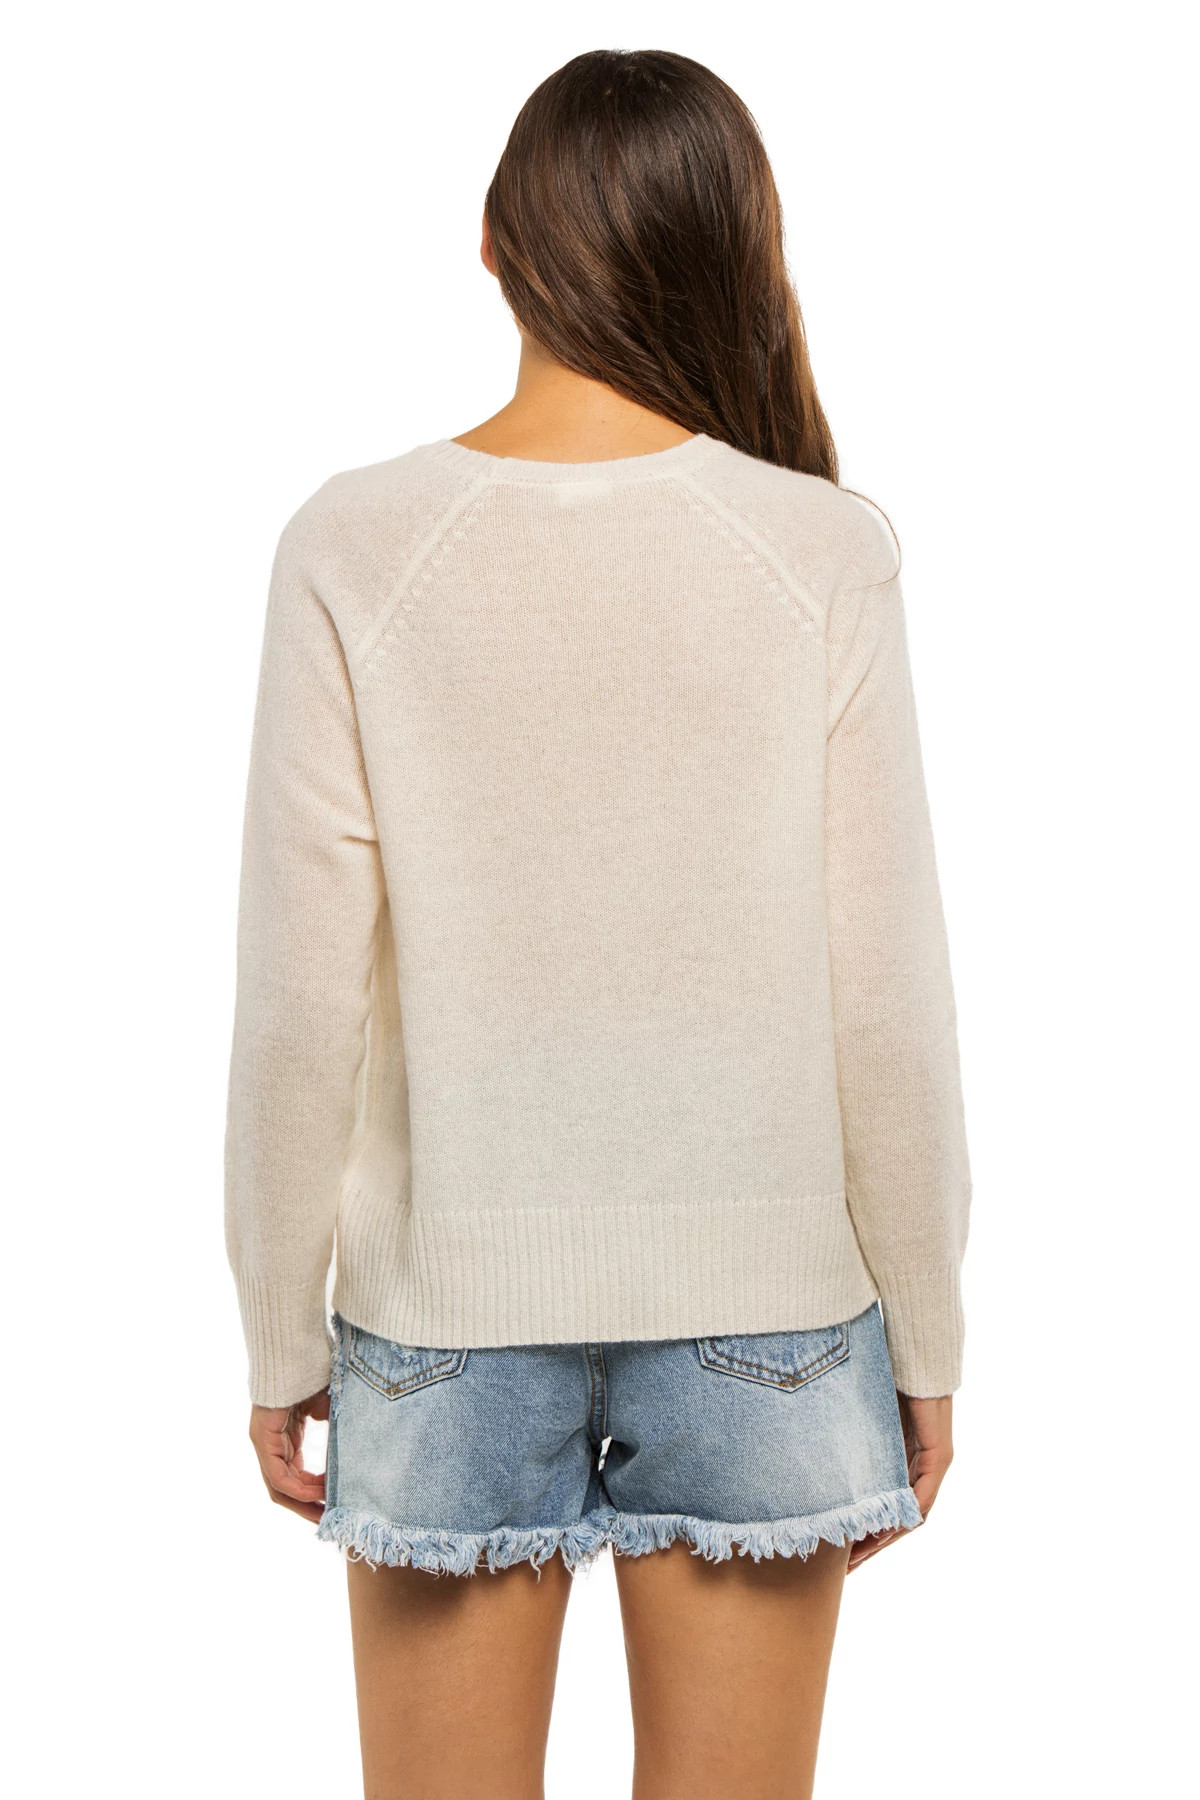 WHITE Sun Kissed Cashmere Sweater image number 2